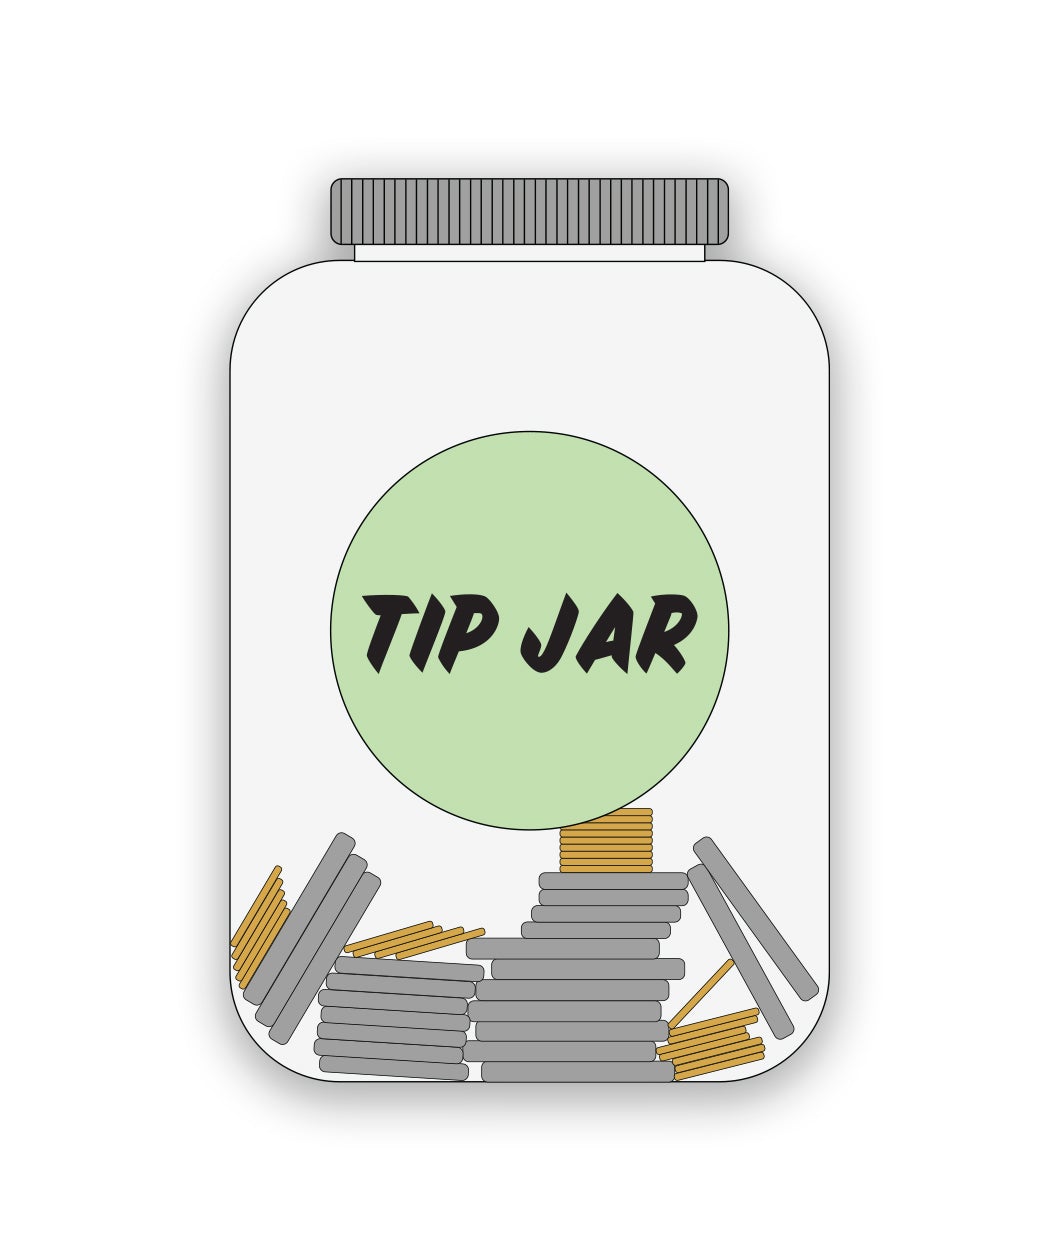 A drawing of a clear cylindrical jar with coins inside of it and a mint green circle on it labeled 